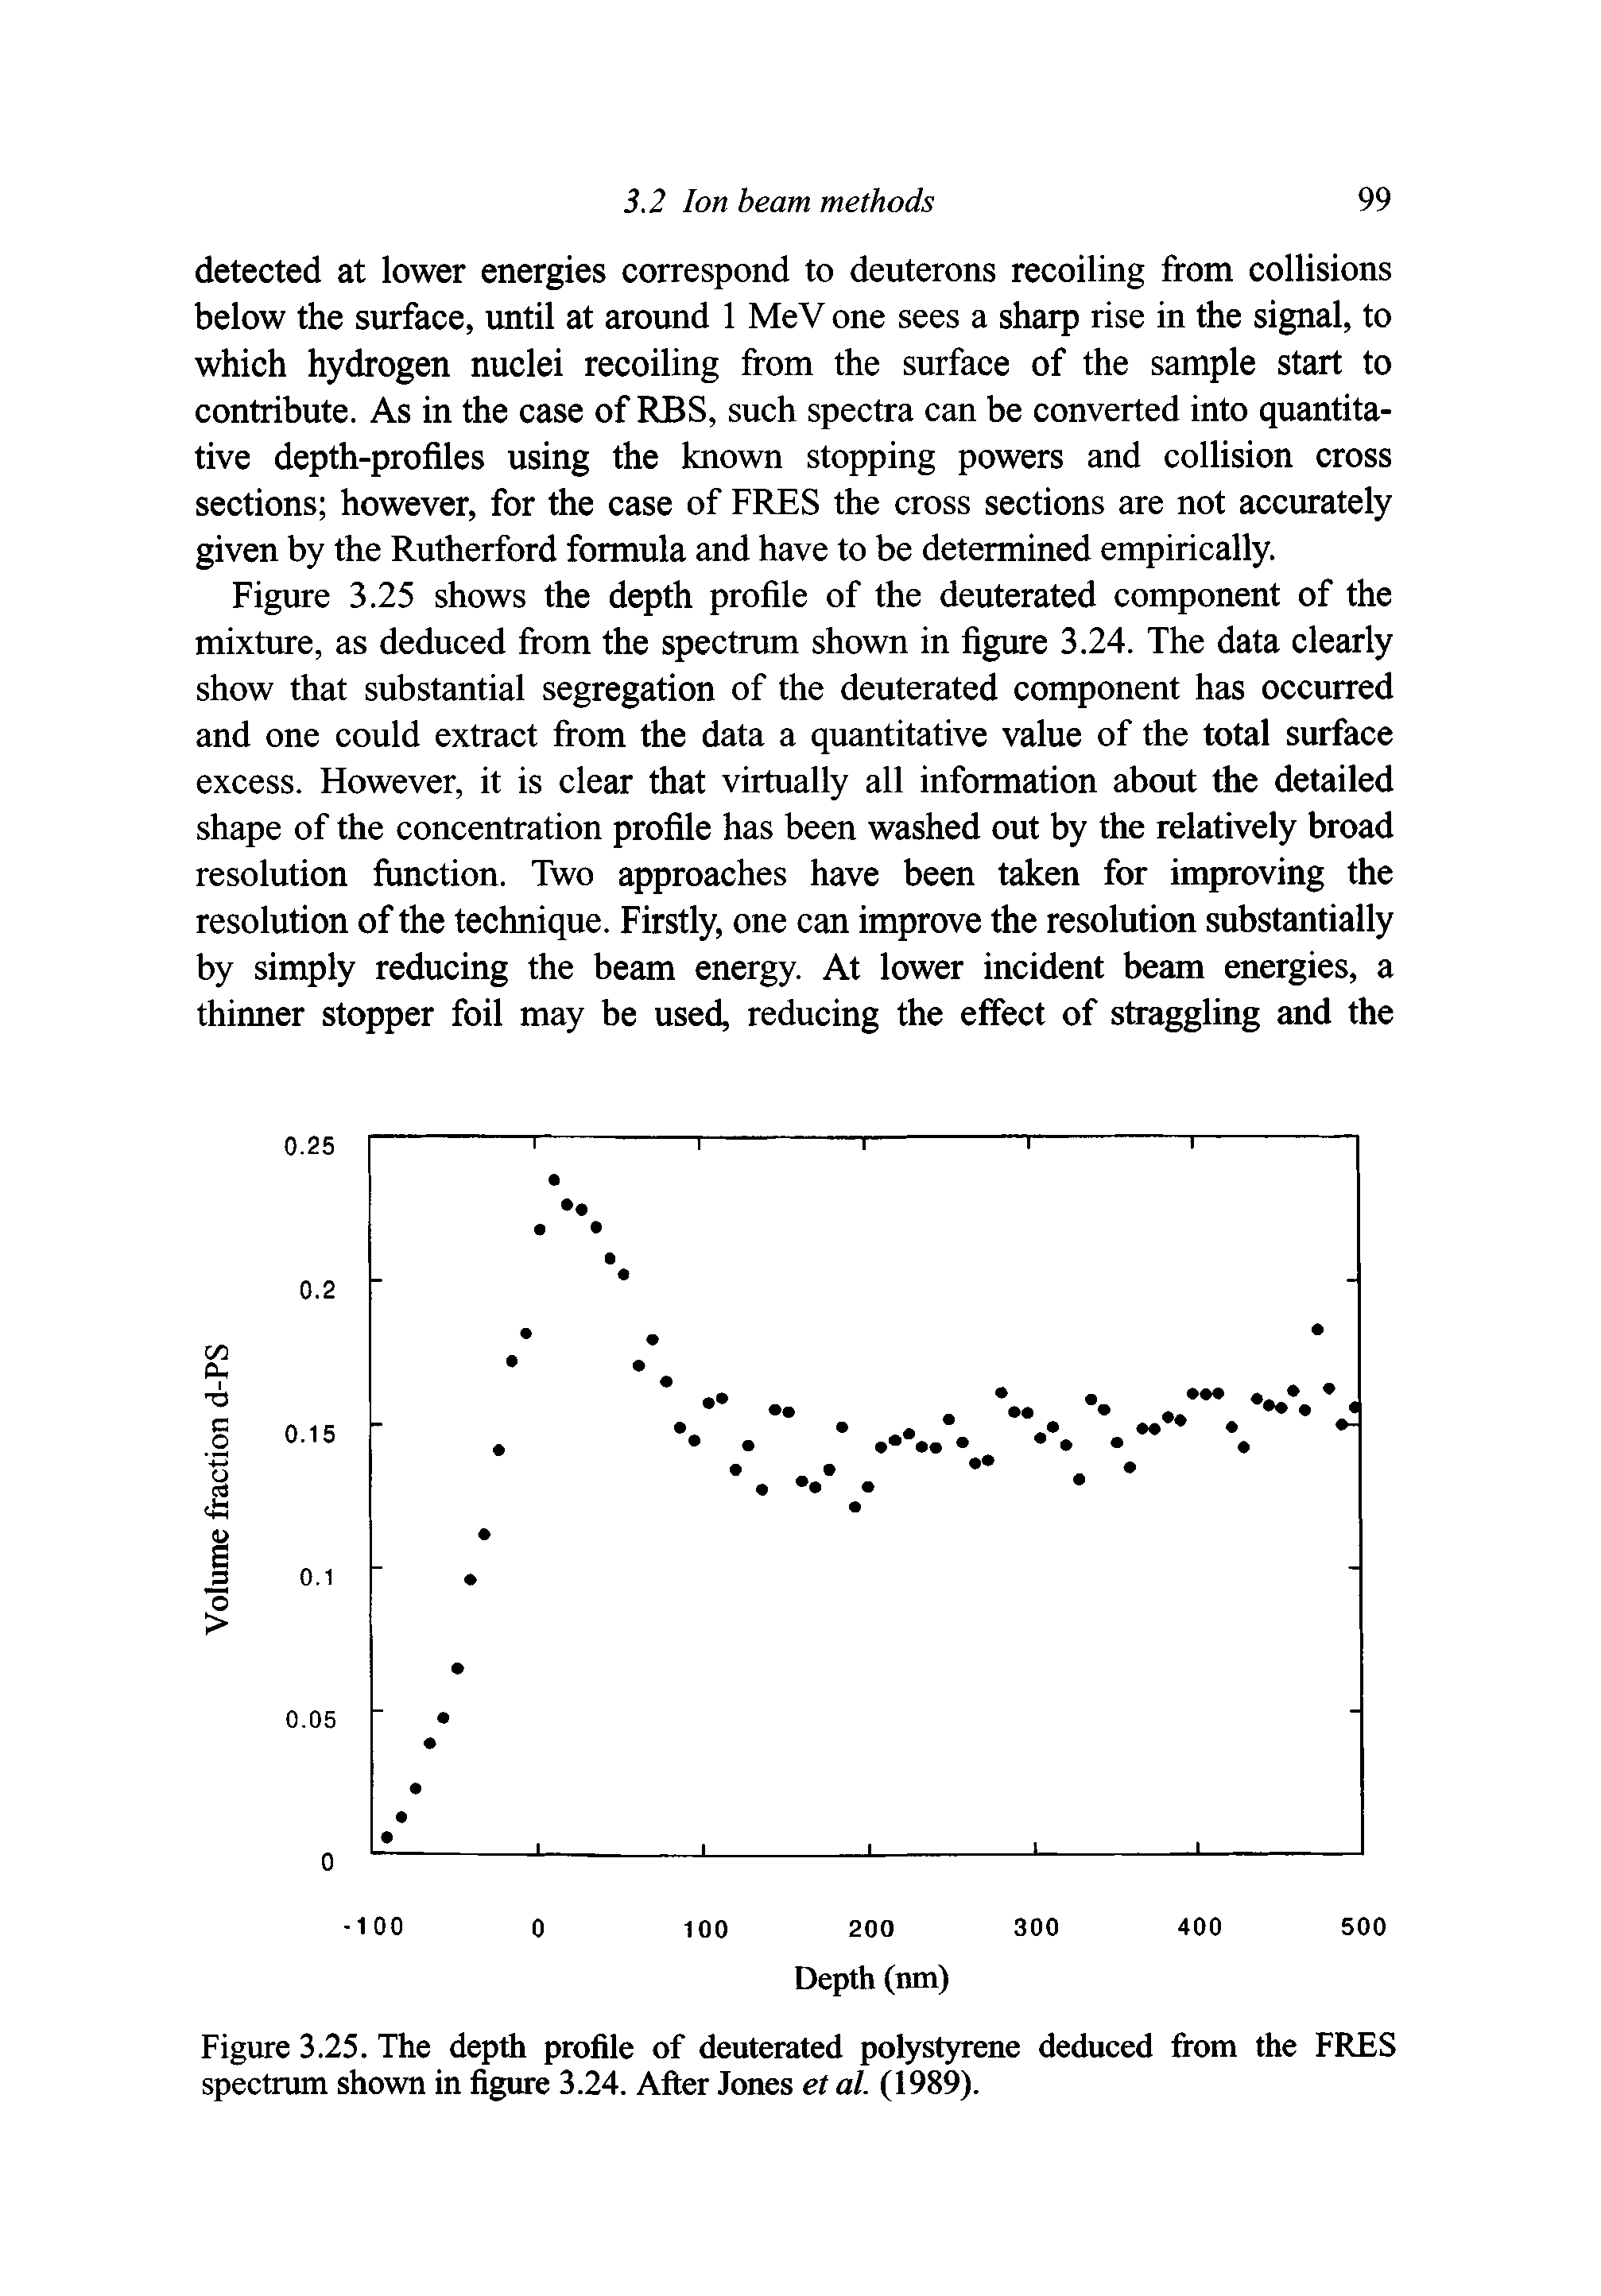 Figure 3.25. The depth profile of deuterated polystyrene deduced from the FRES spectrum shown in figure 3.24. After Jones et al. (1989).